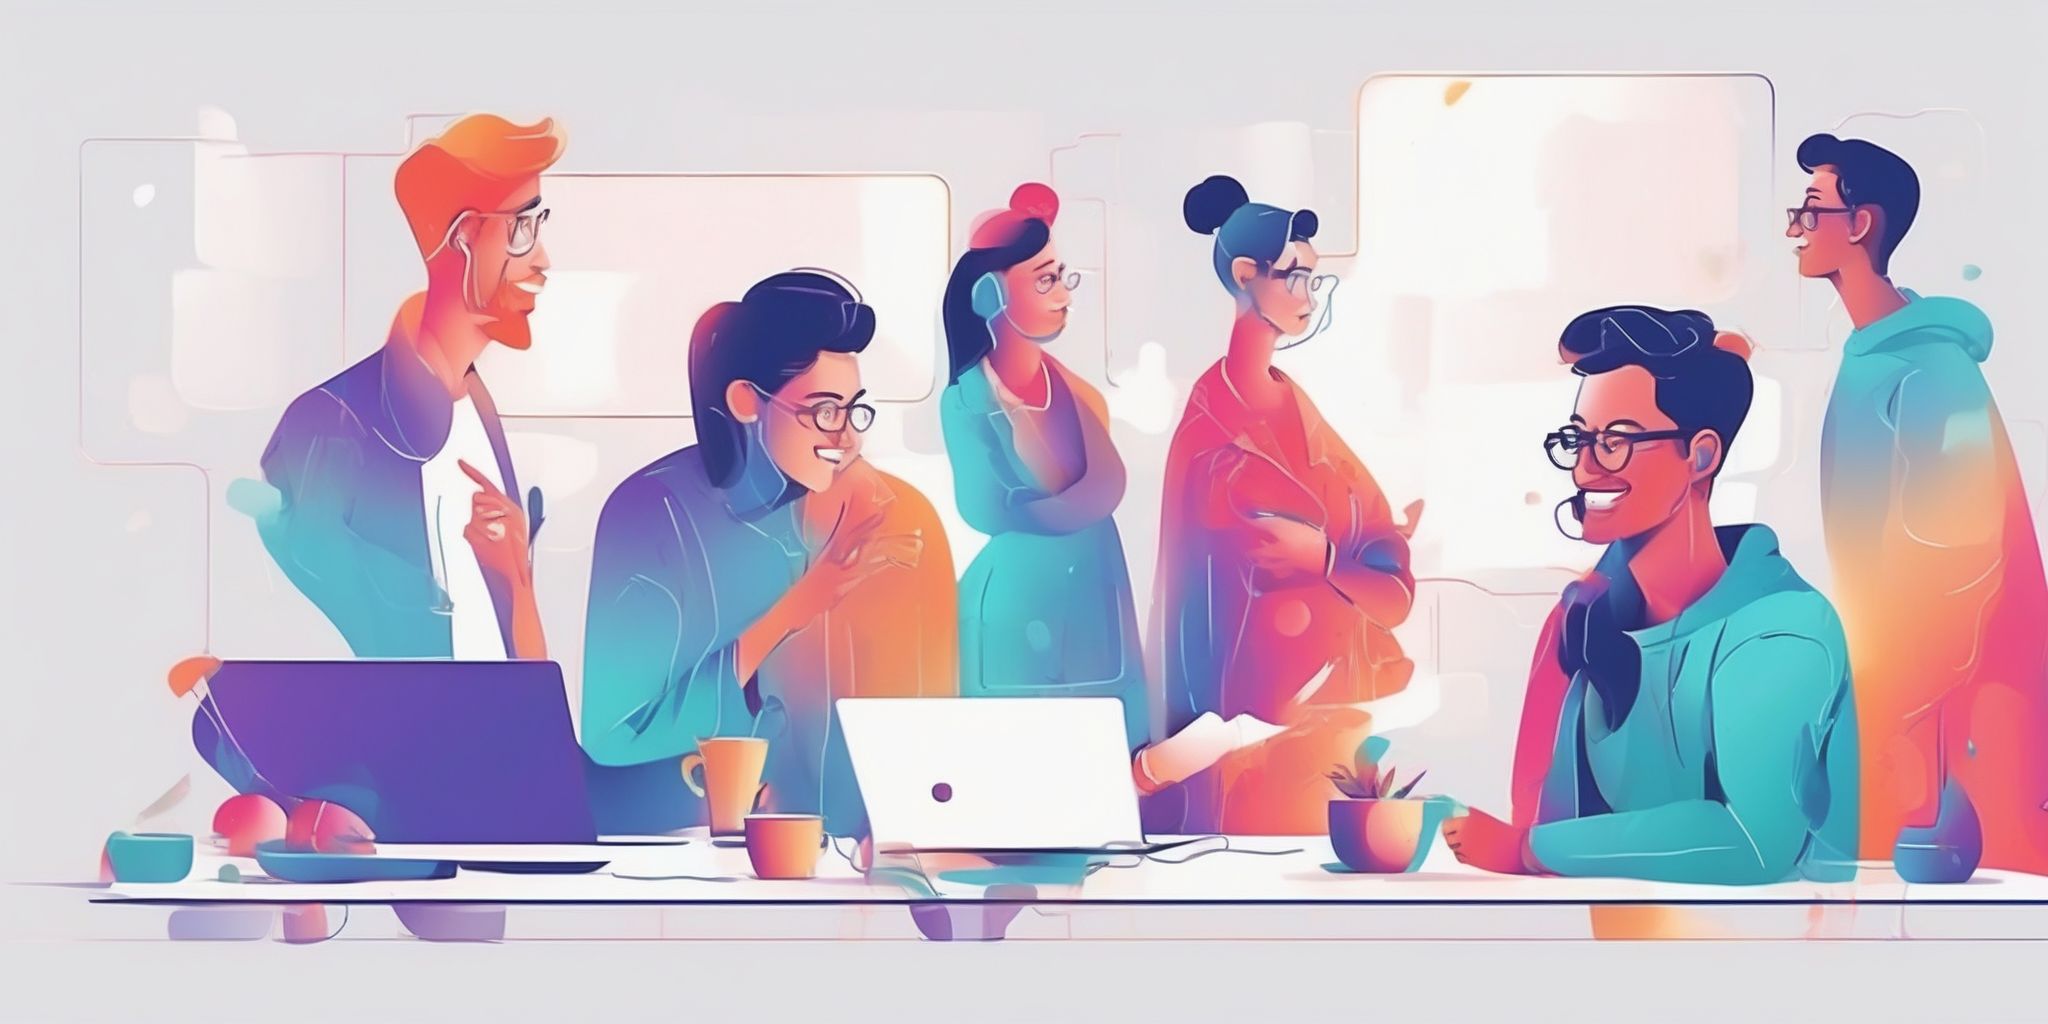 Digital conversation in illustration style with gradients and white background